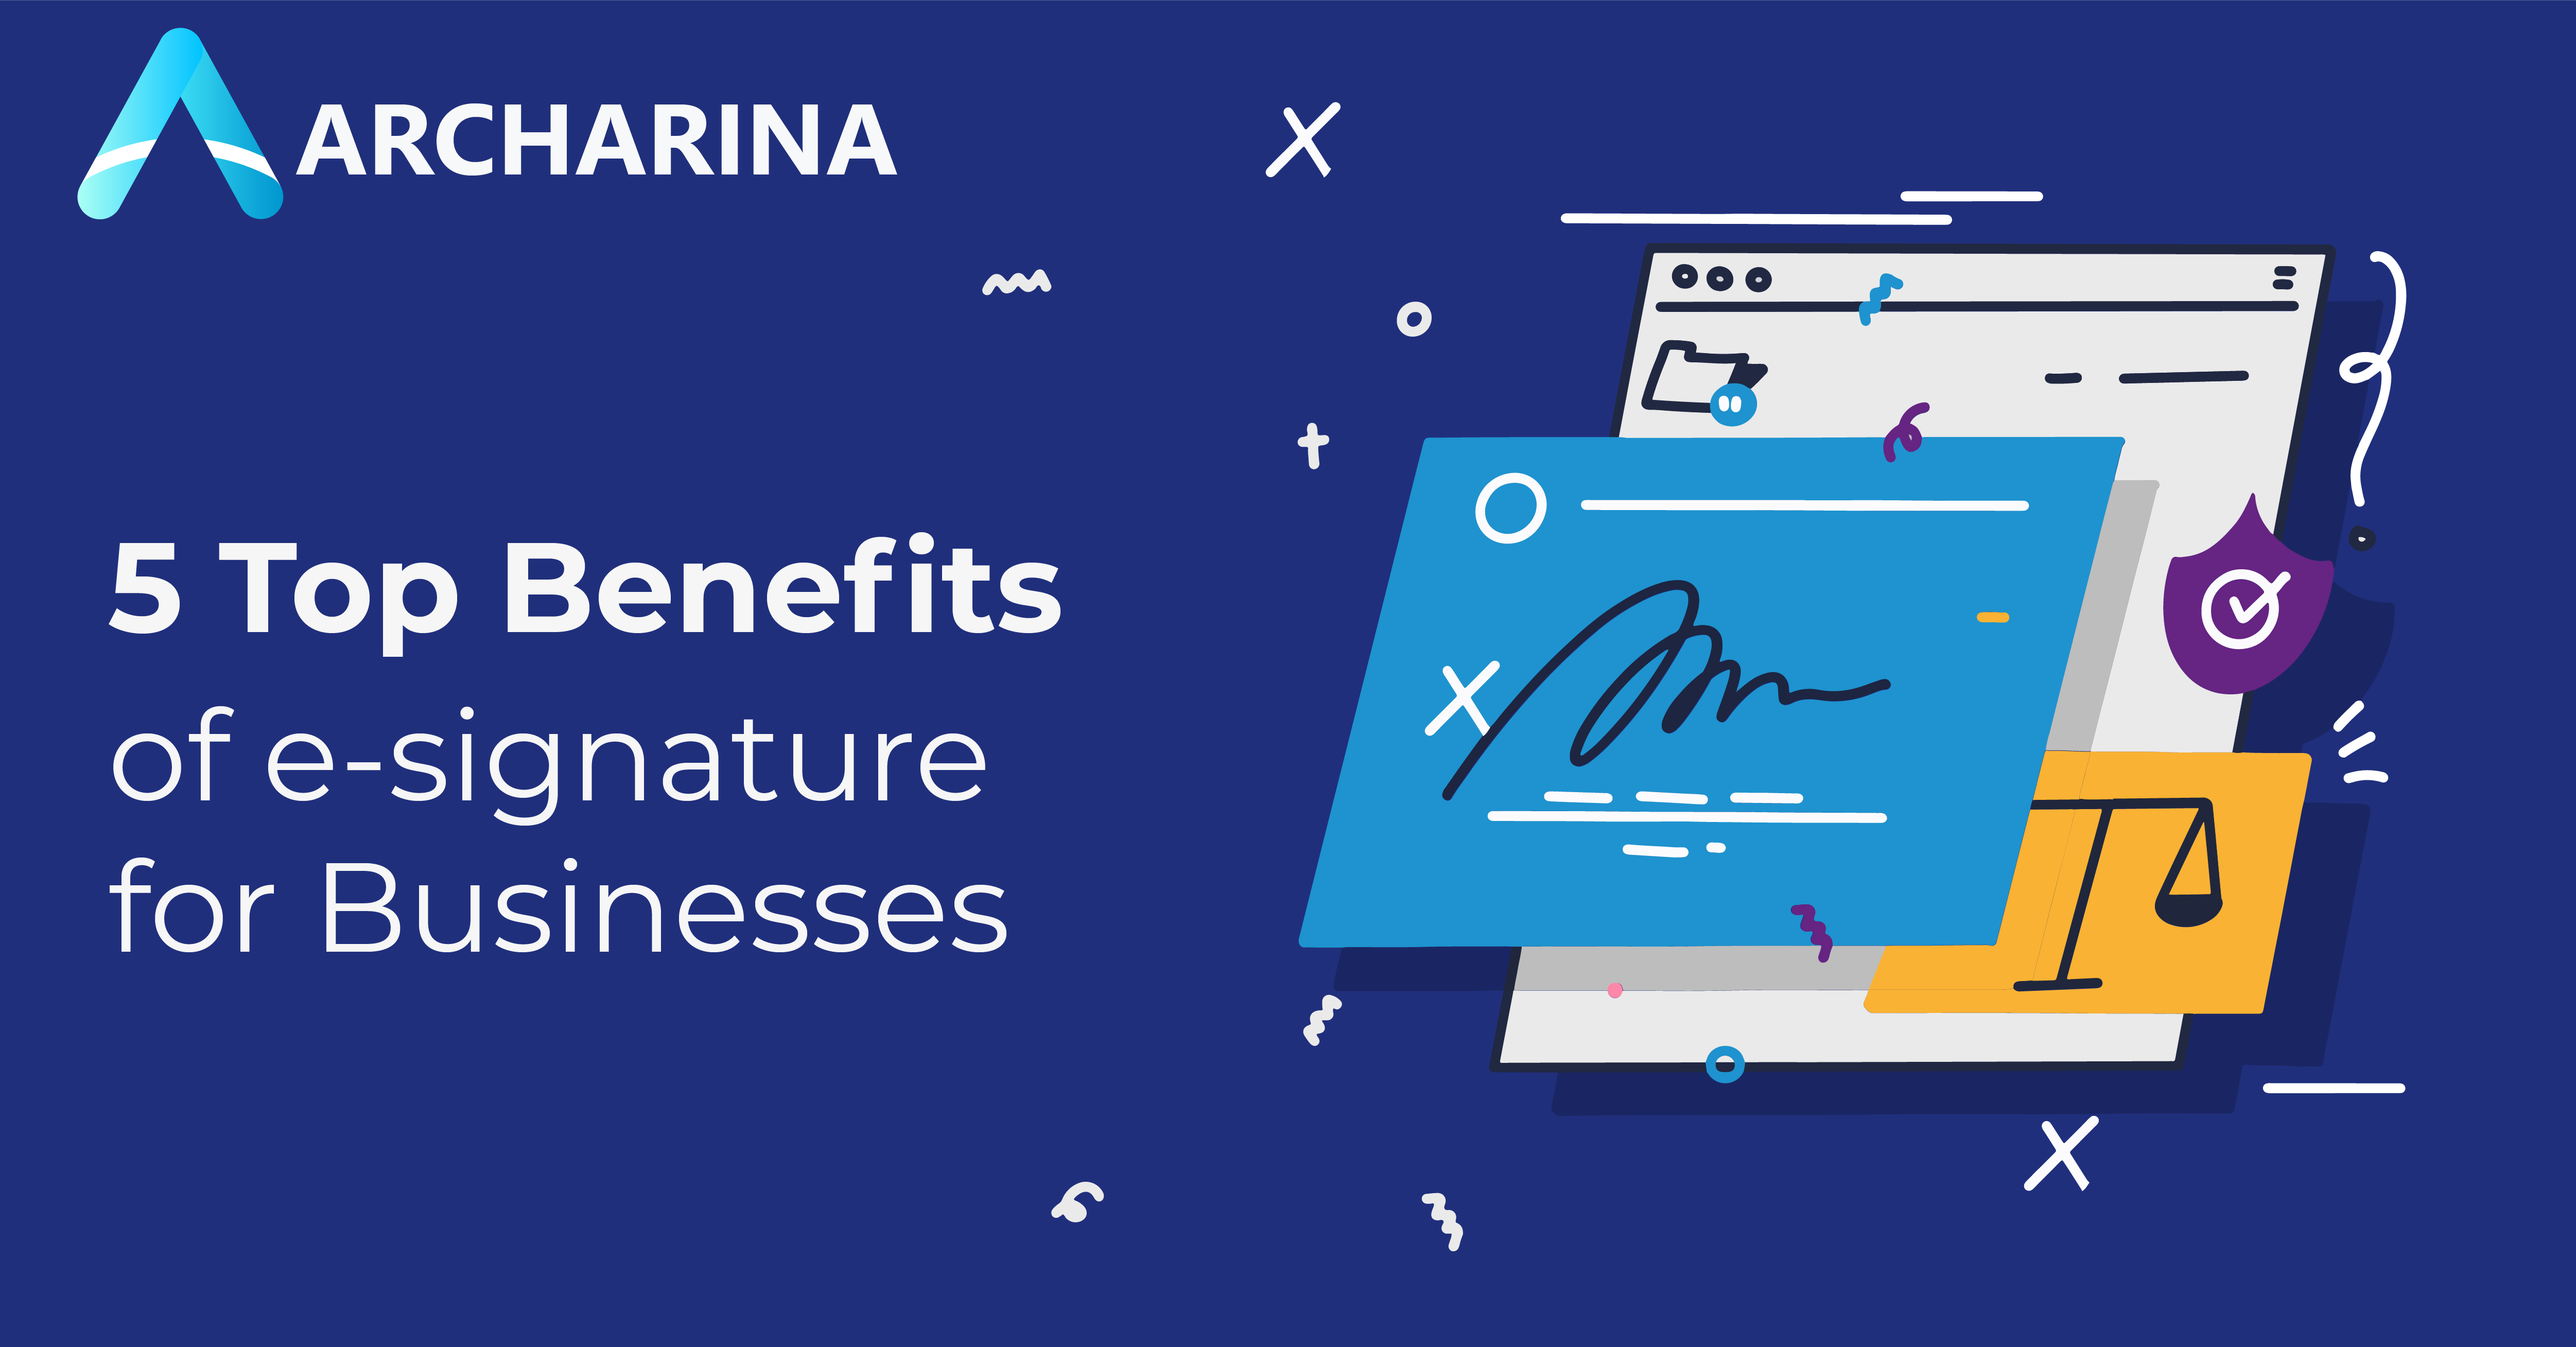 T5-Top-Benefits-of-e-signature-for-Businesses